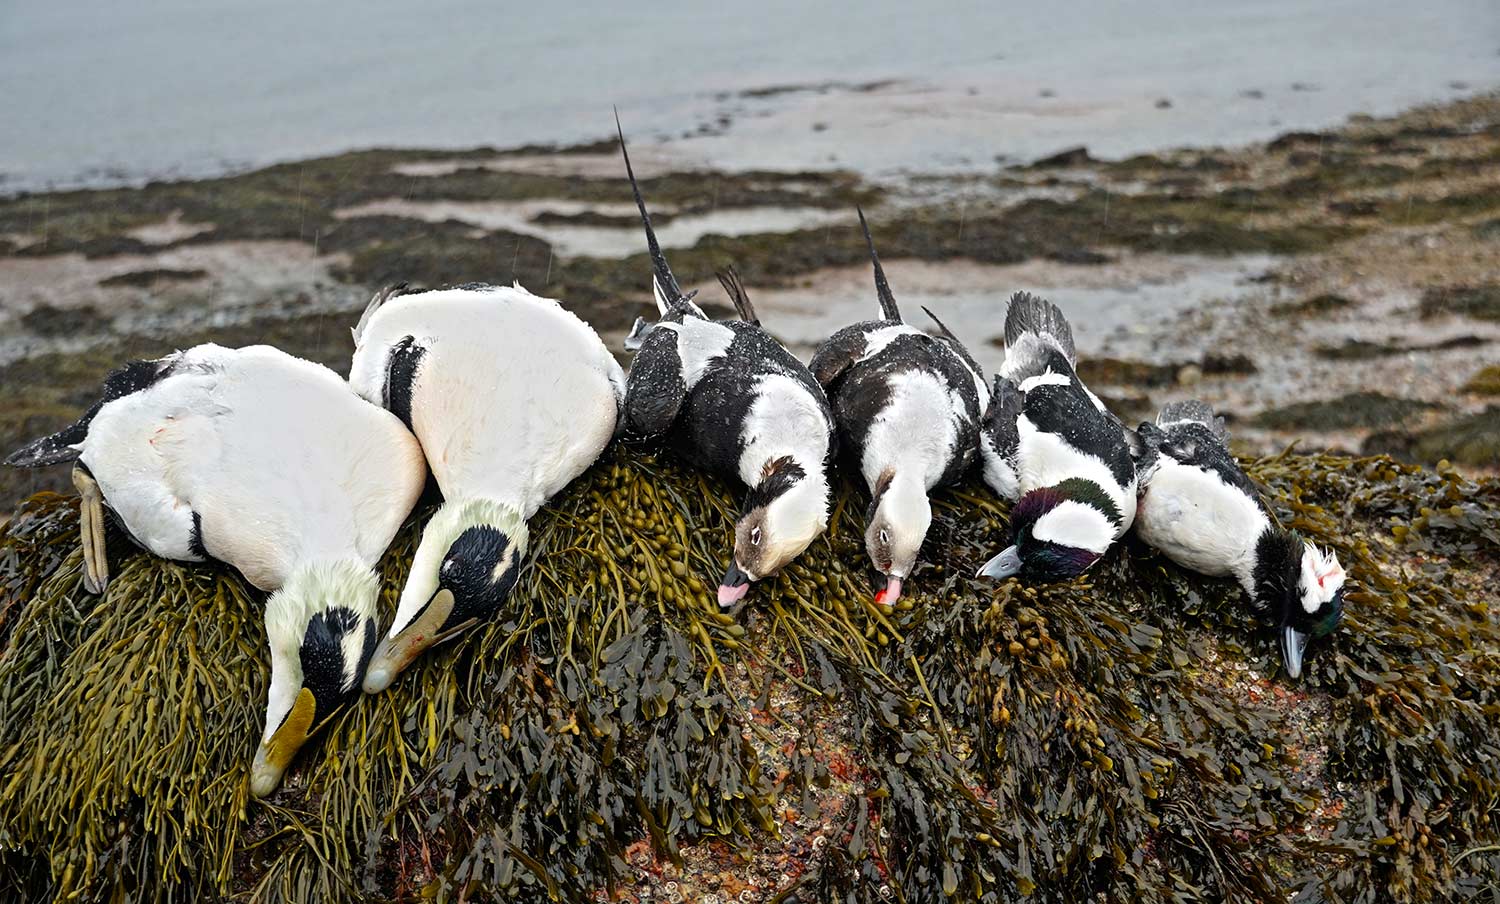 a limit of eiders or longtail ducks